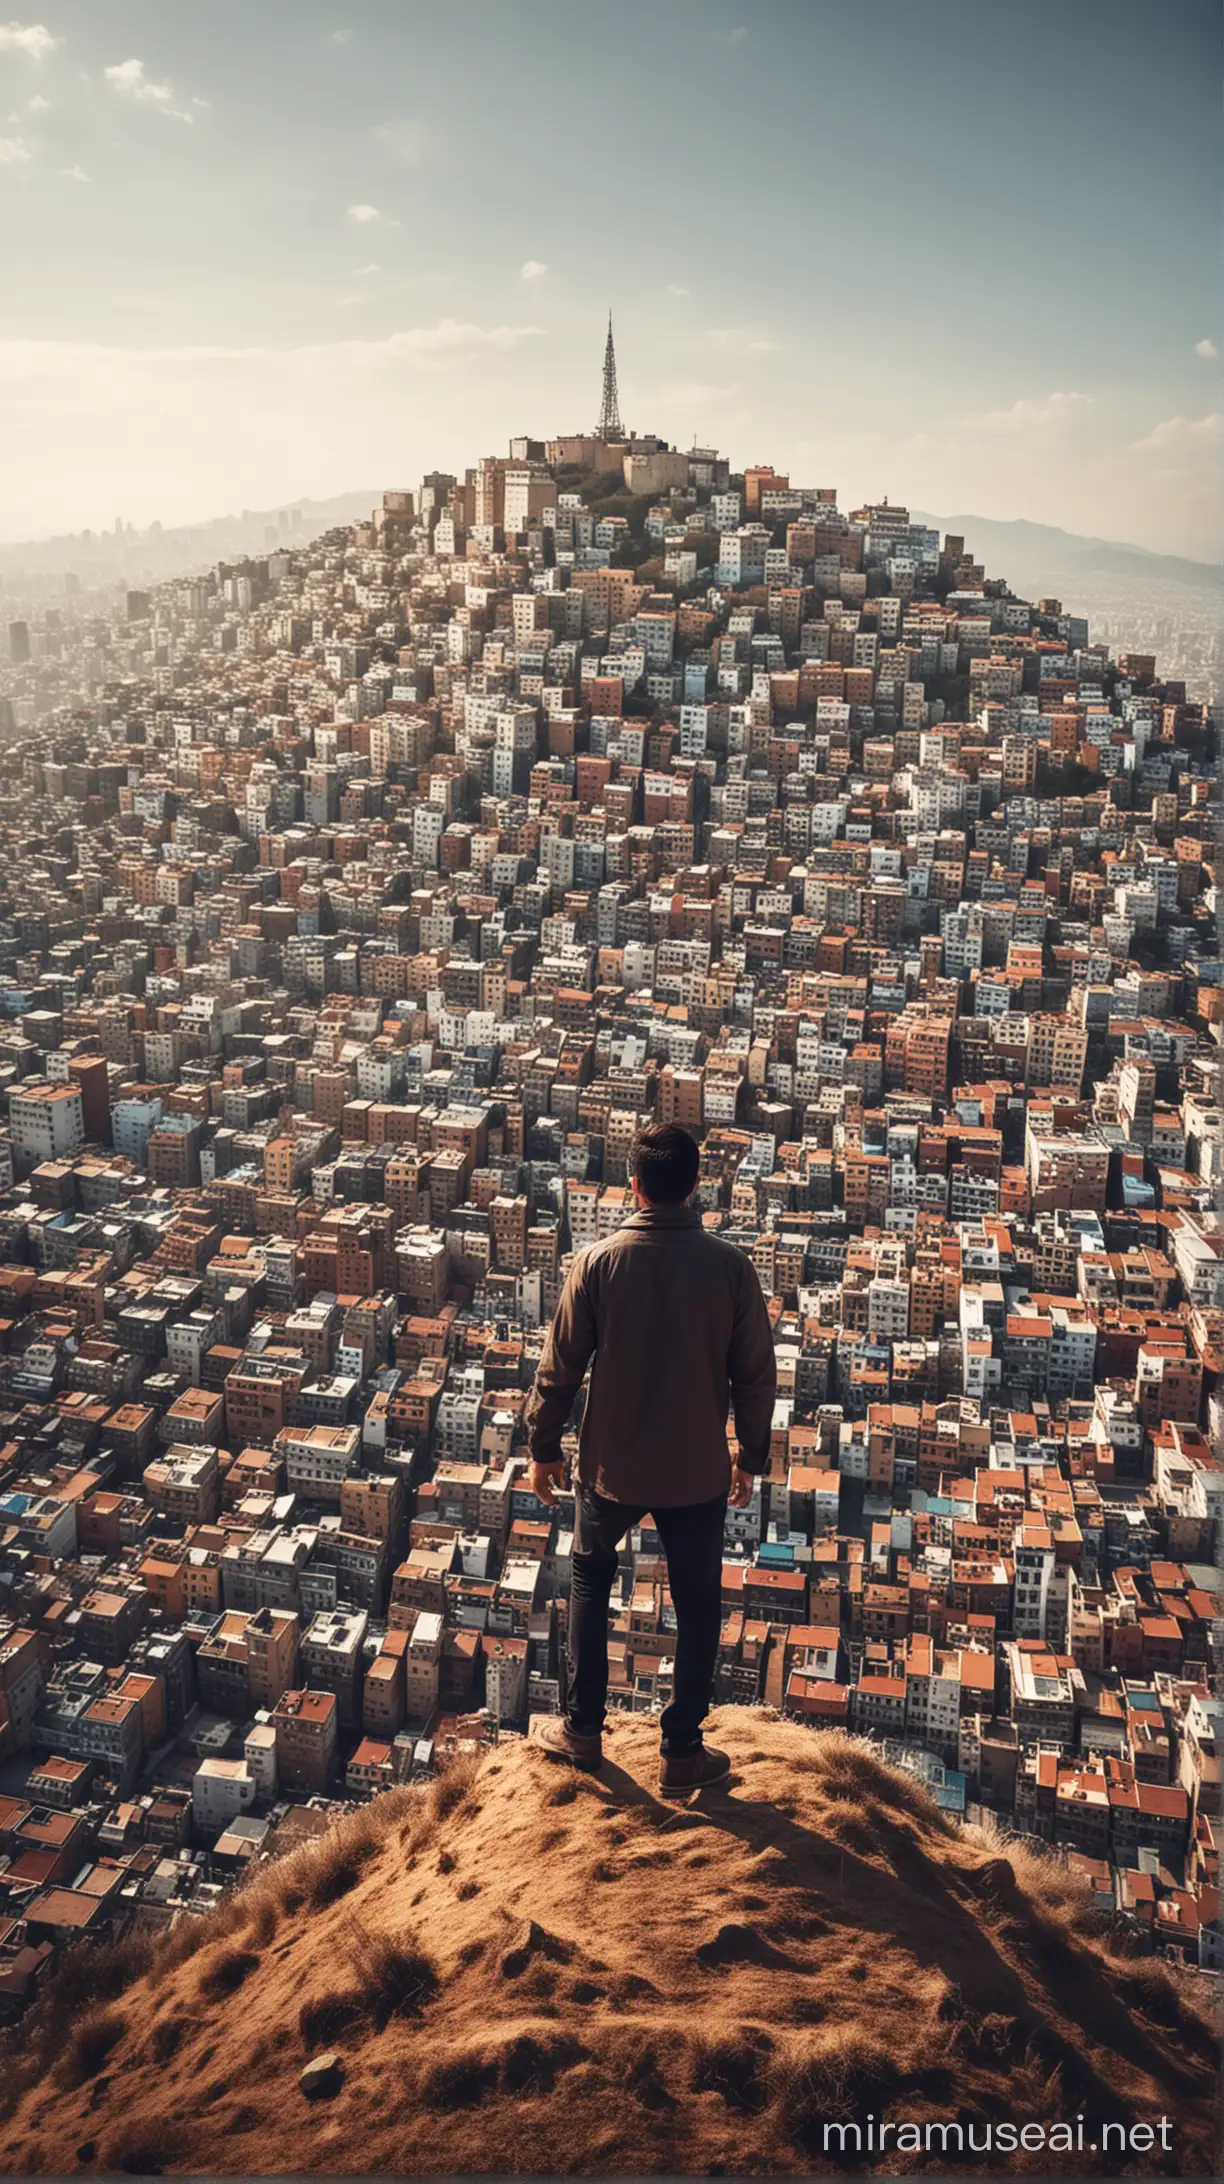 Man Standing on Hill Overlooking Bustling Cityscape